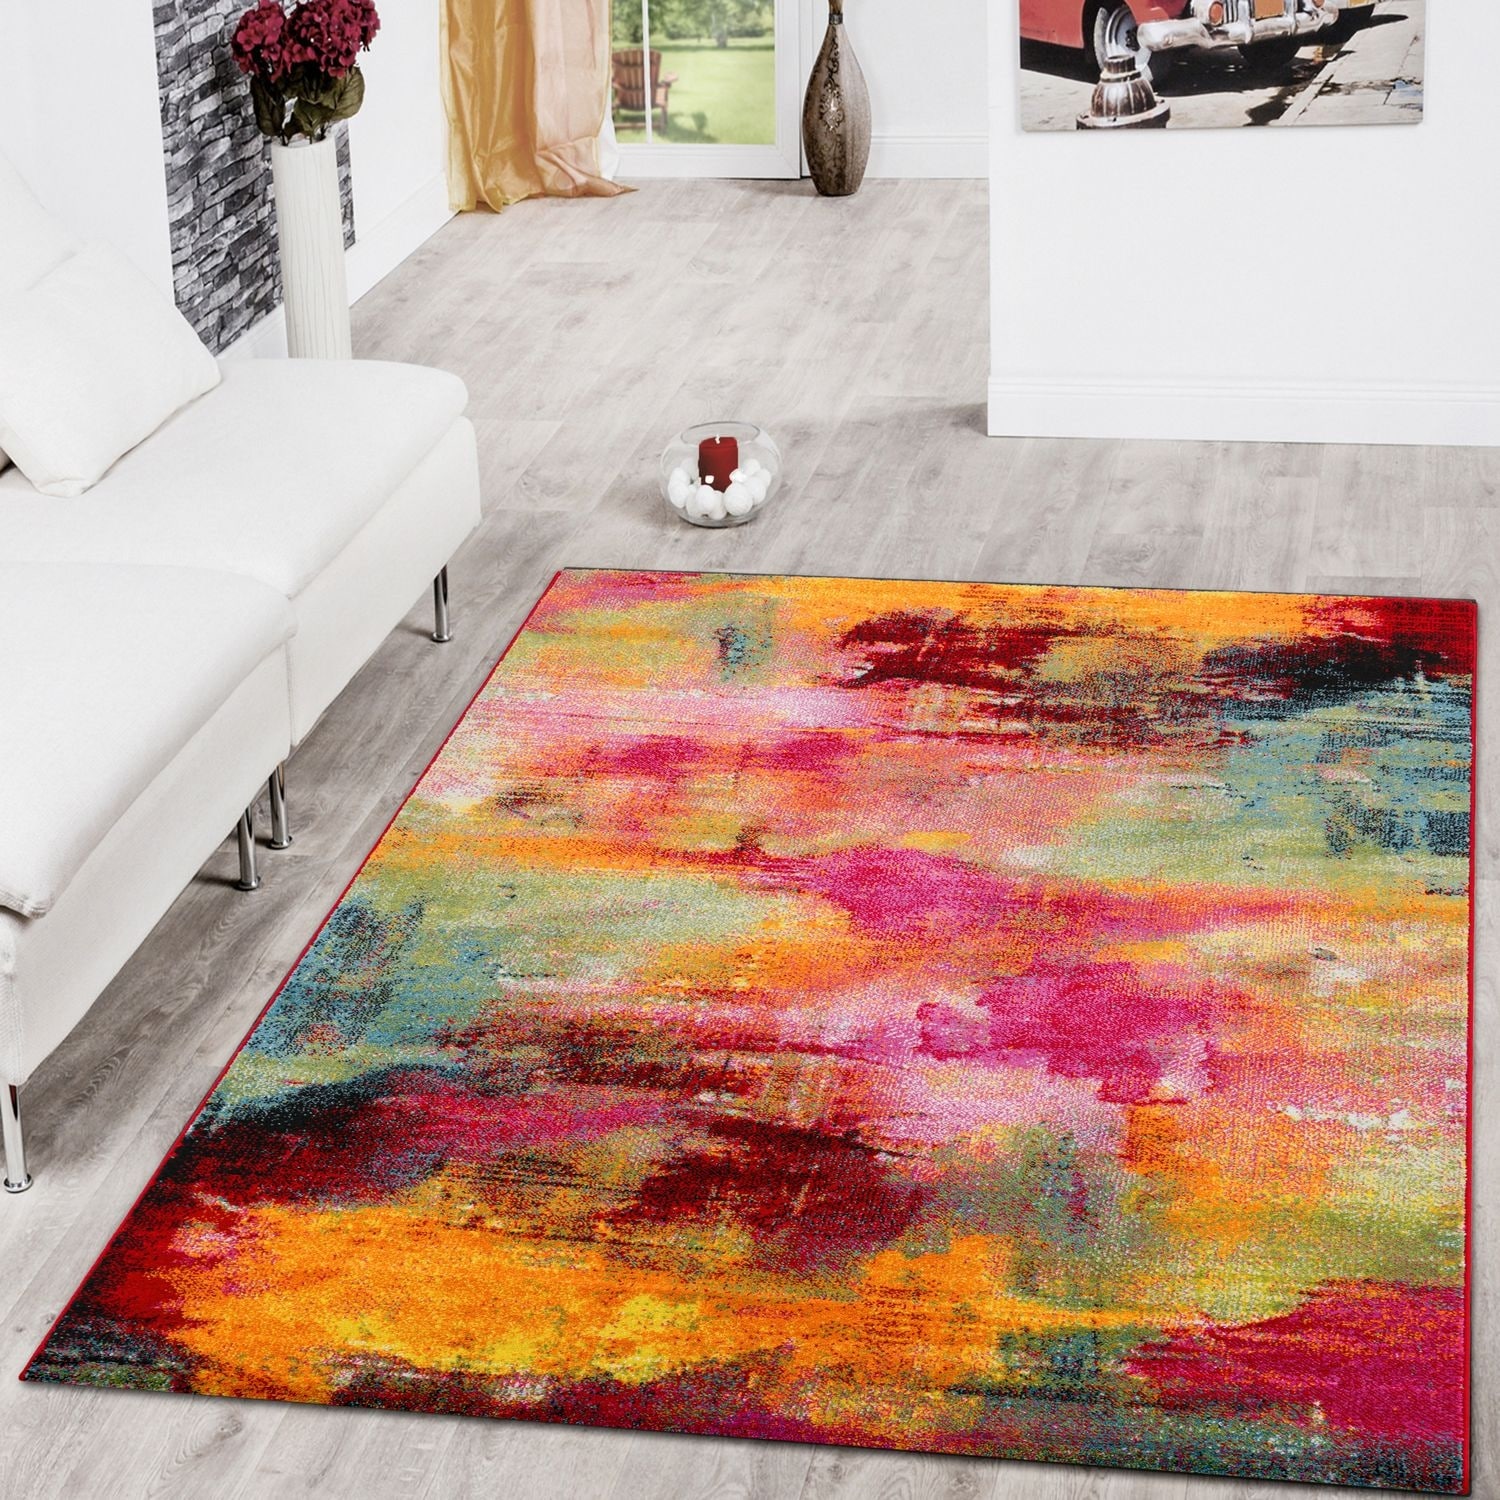 https://ak1.ostkcdn.com/images/products/is/images/direct/09b2d84b86c2f3154b33a33ff7d56d18dfeda310/Colorful-Area-Rug-with-Artful-Design-Multicolor-Pattern.jpg